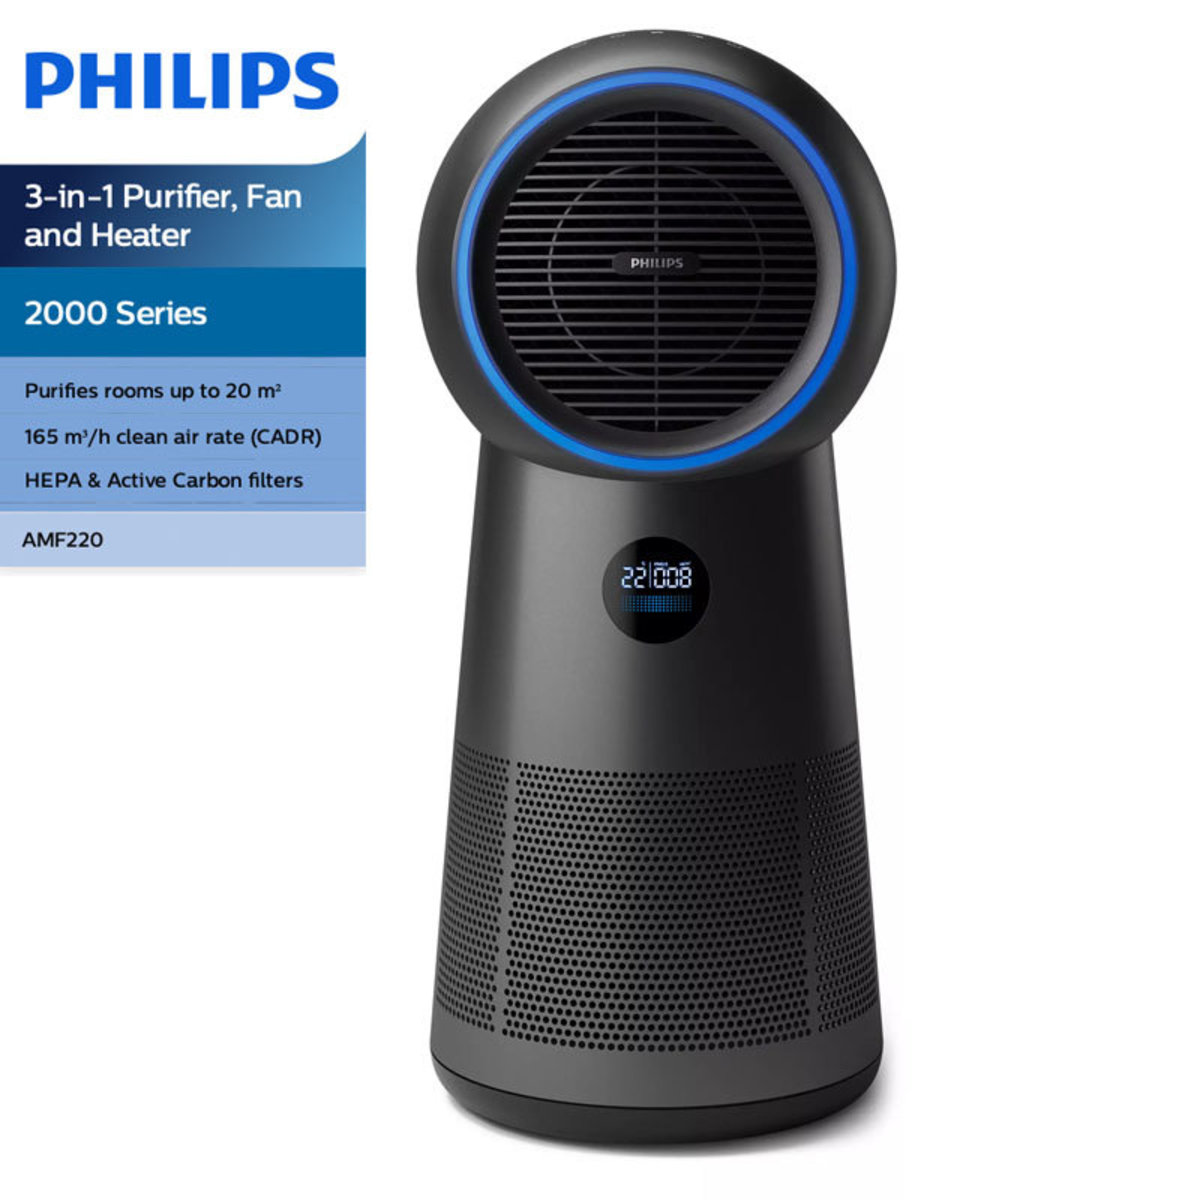 PHILIPS  2000 Series AMF220 3-in-1 Purifier, Fan and Heater Two